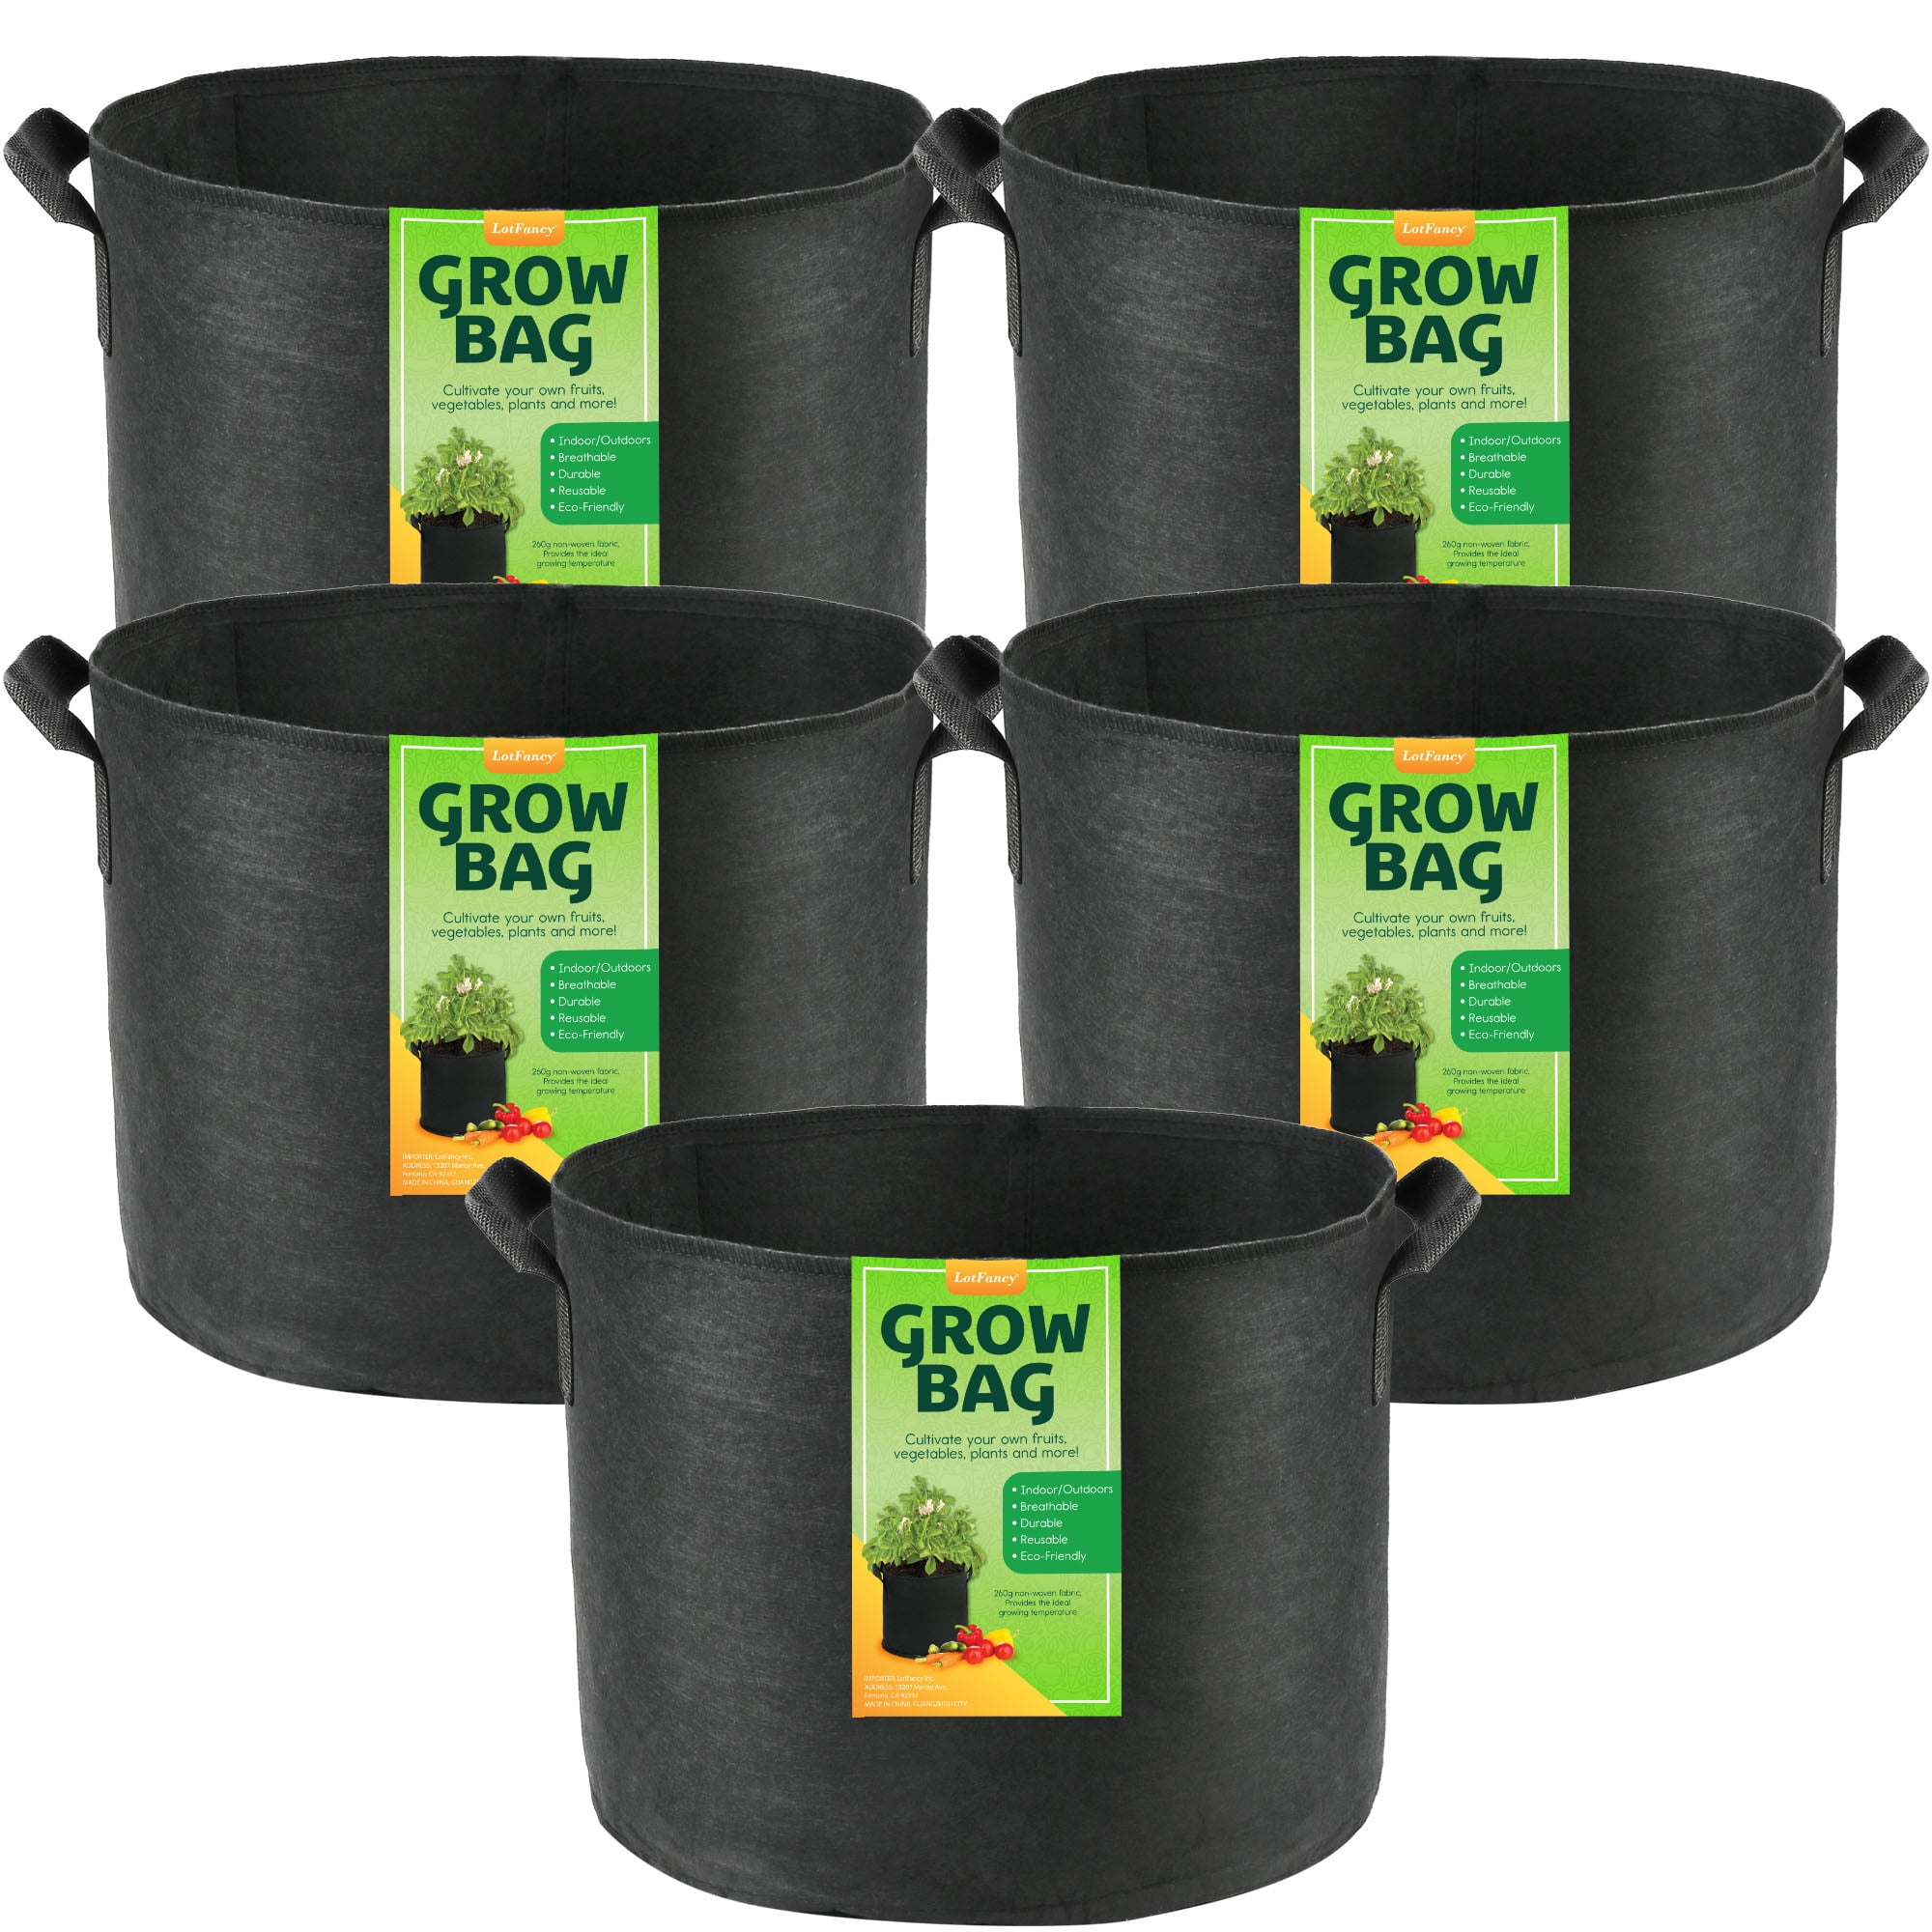 VEVOR 65 gal. with Handles Plant Grow Bag Aeration Fabric Pots Black Grow Bag Plant Container (12-Pack)